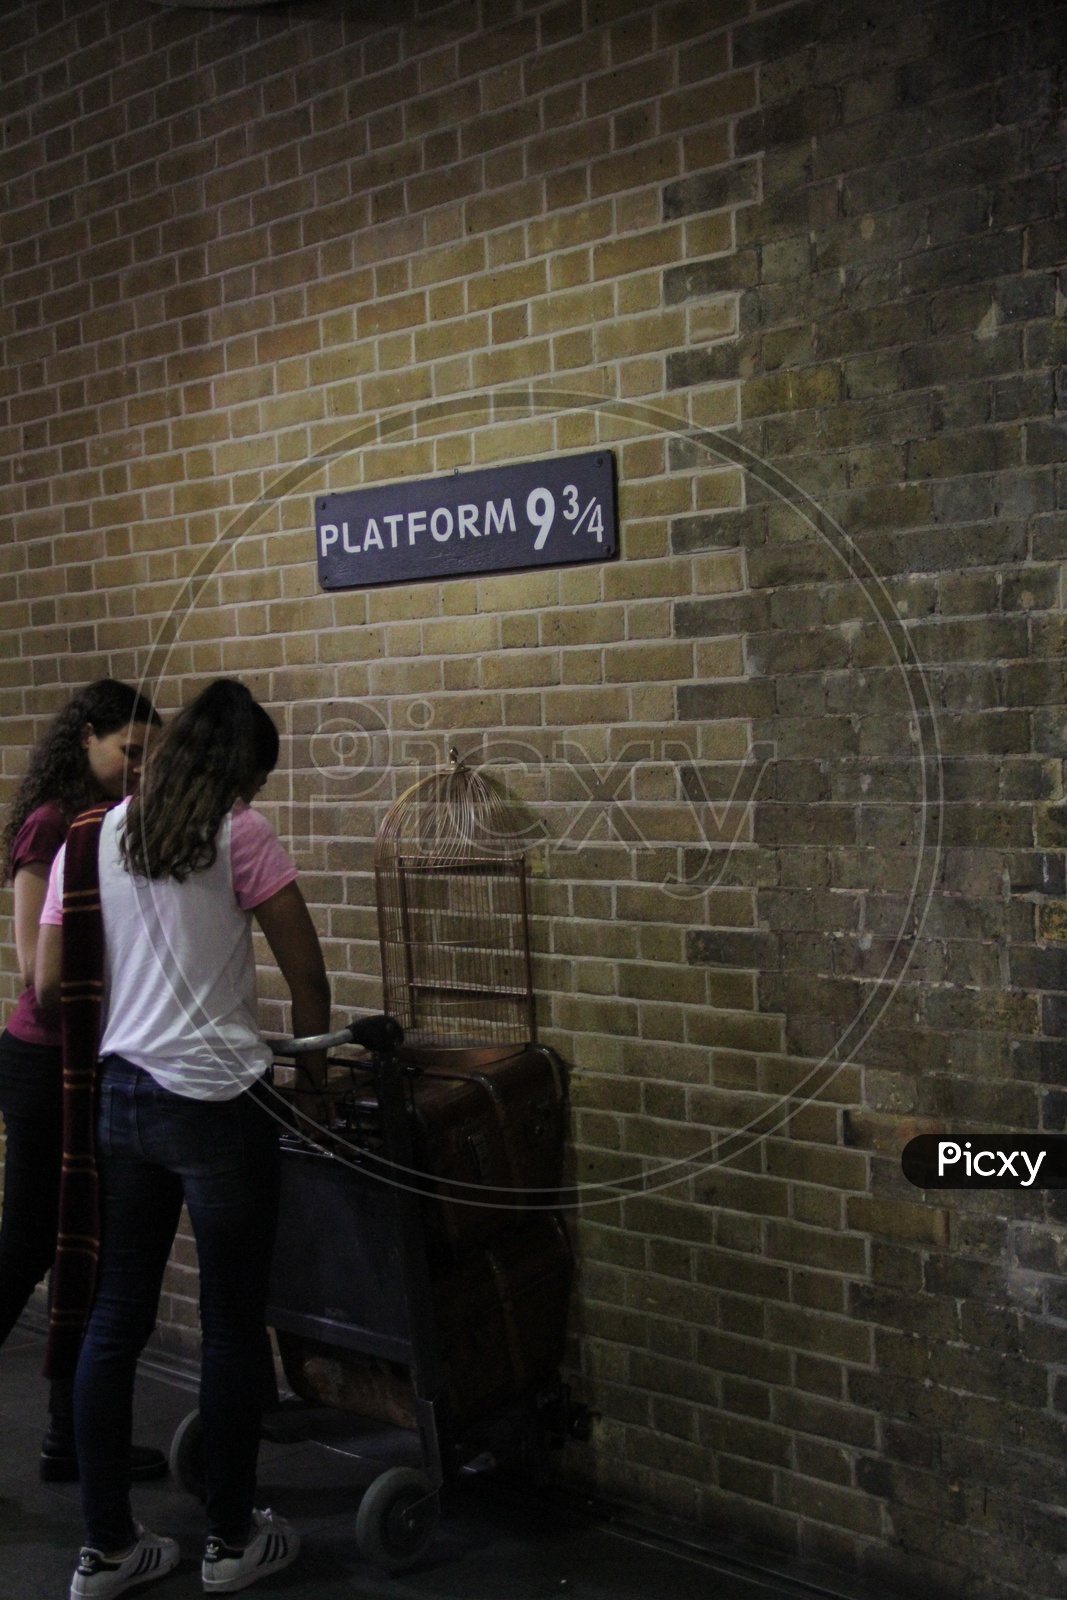 Young Women at Platform 9 3/4 Sign from Harry Potter movie in King's Cross Station